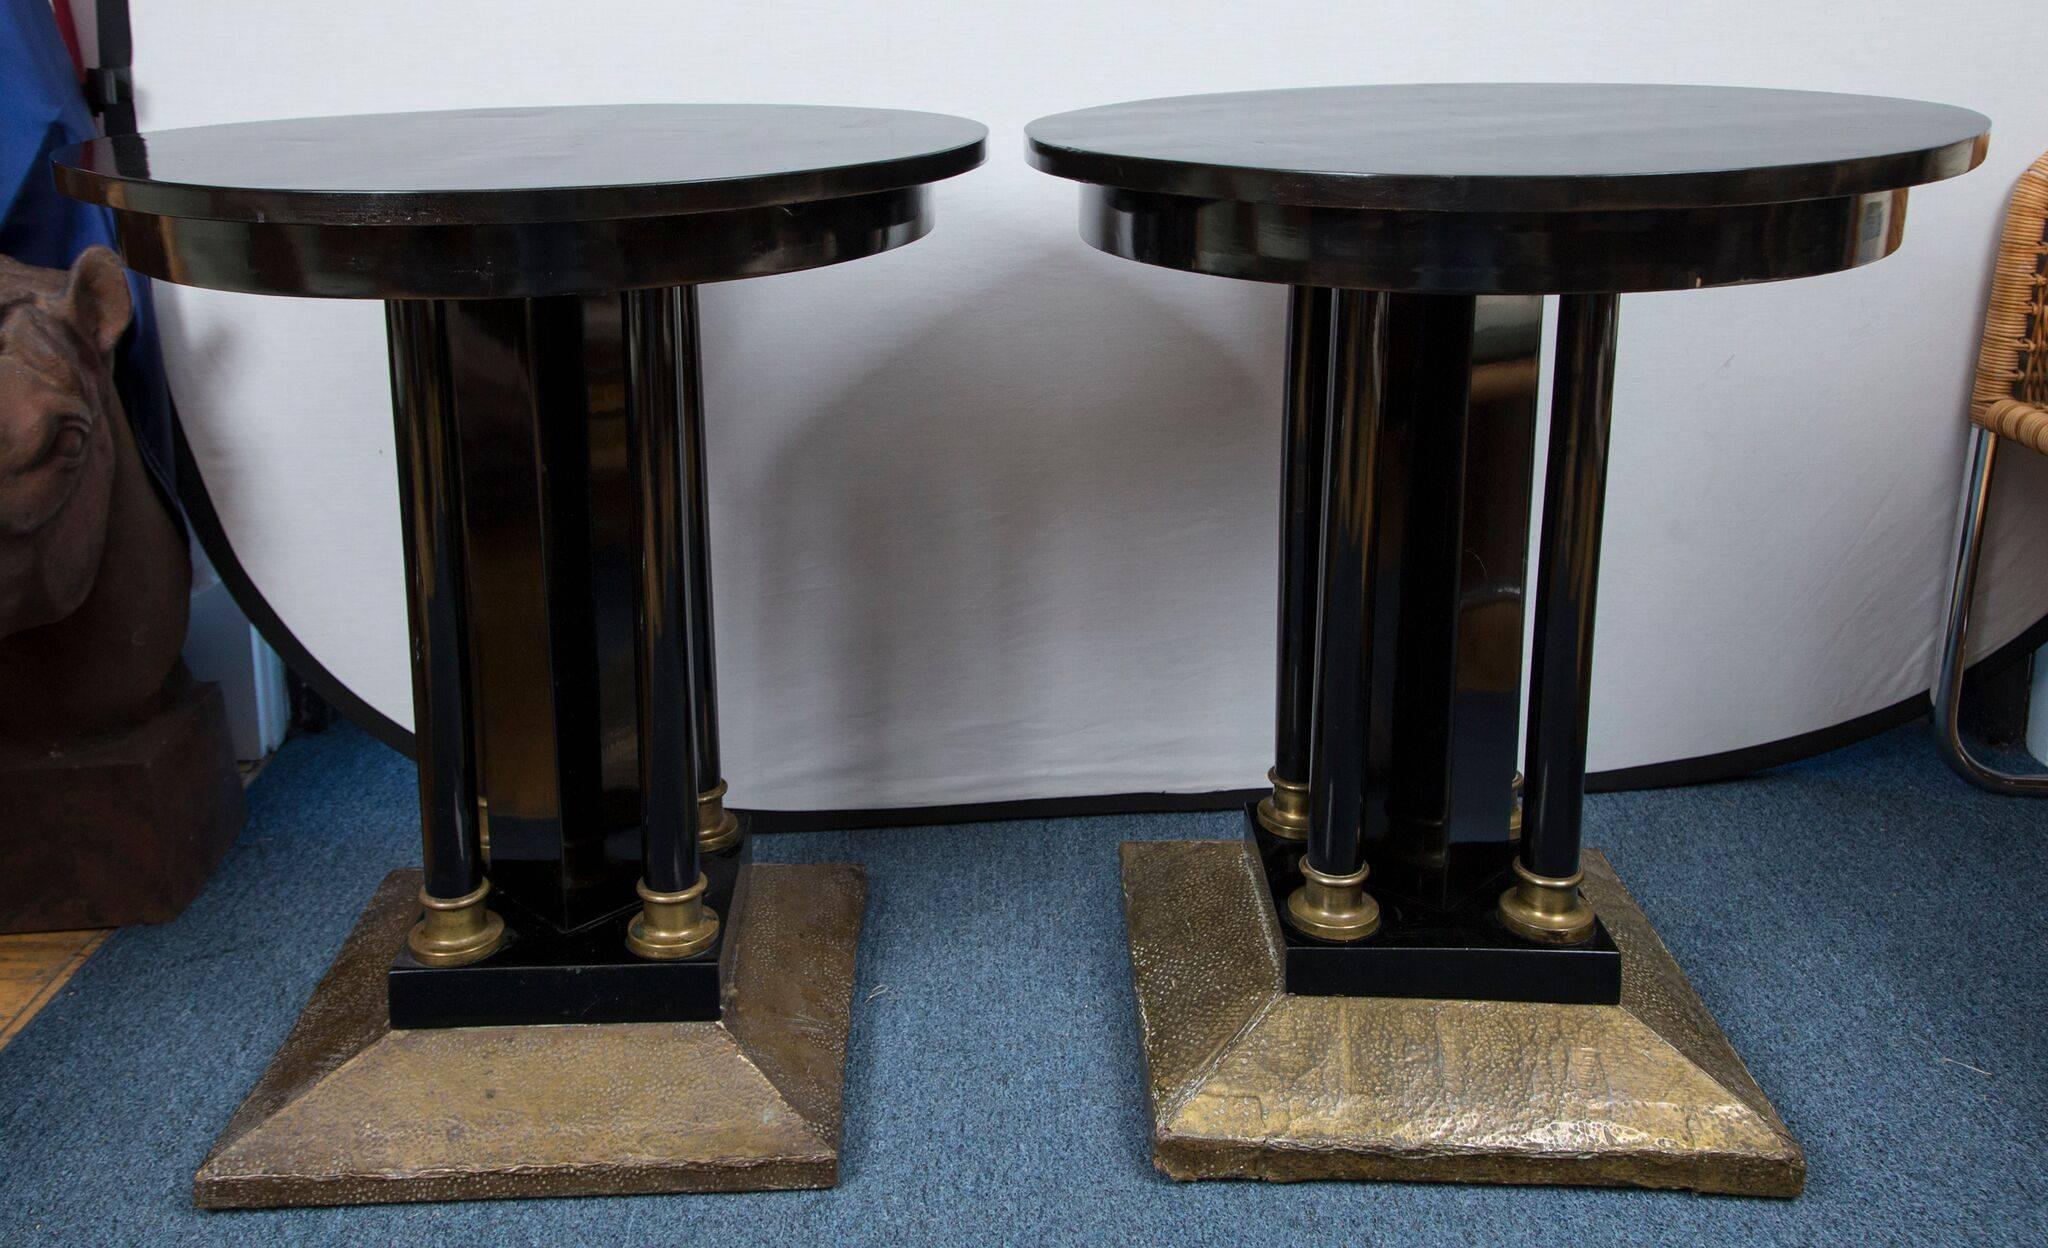 A pair of black lacquered wood tables with pedestal bases. The square foot of each base is mounted in hand-hammered brass and the pedestal columns sit in brass caps.